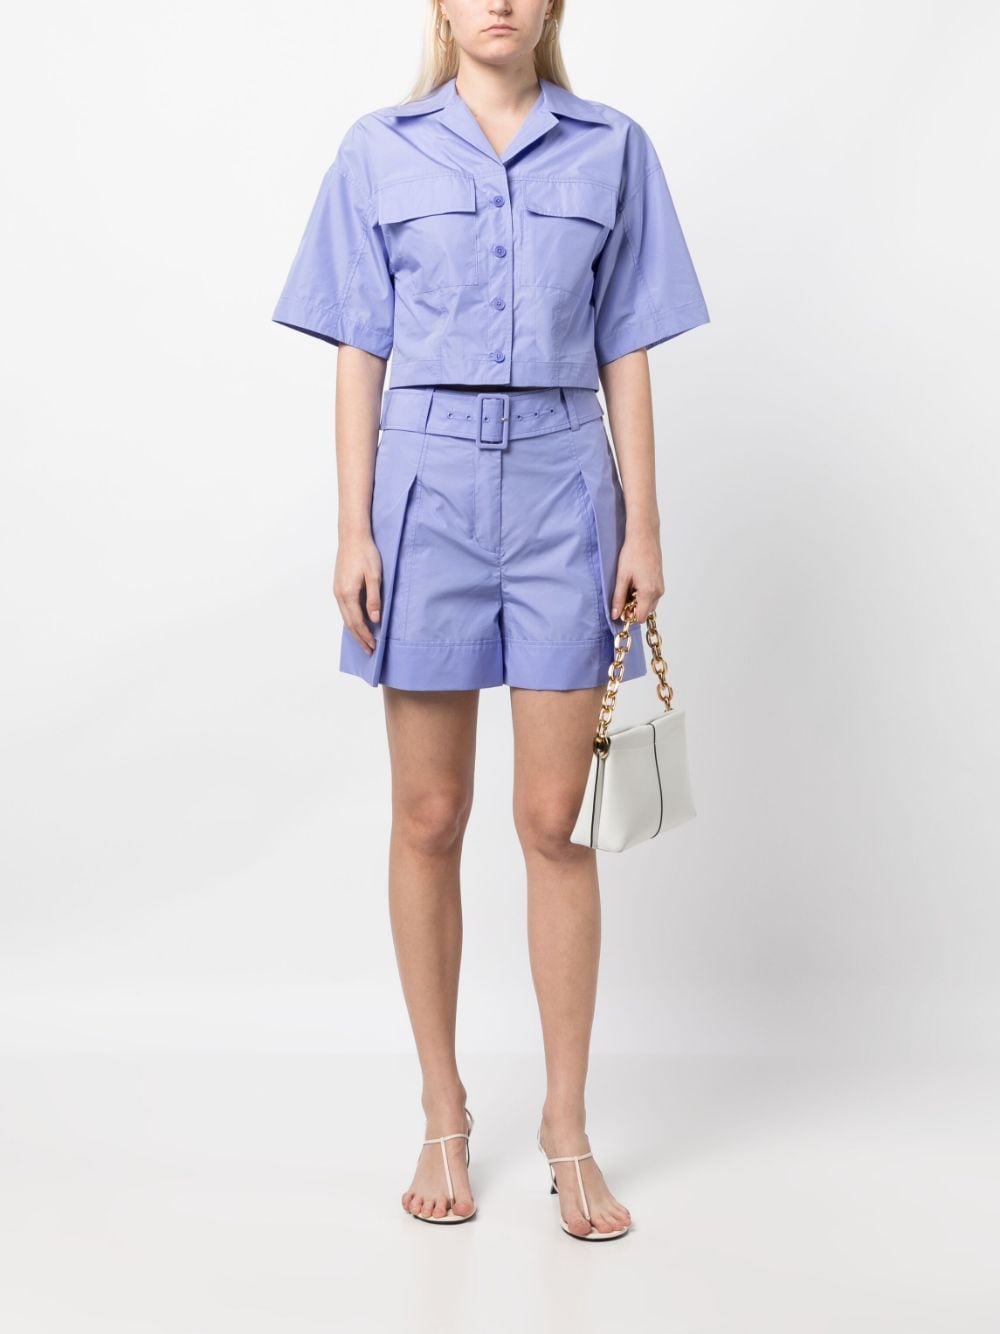 Image 2 of 3.1 Phillip Lim pleat-detailing belted shorts